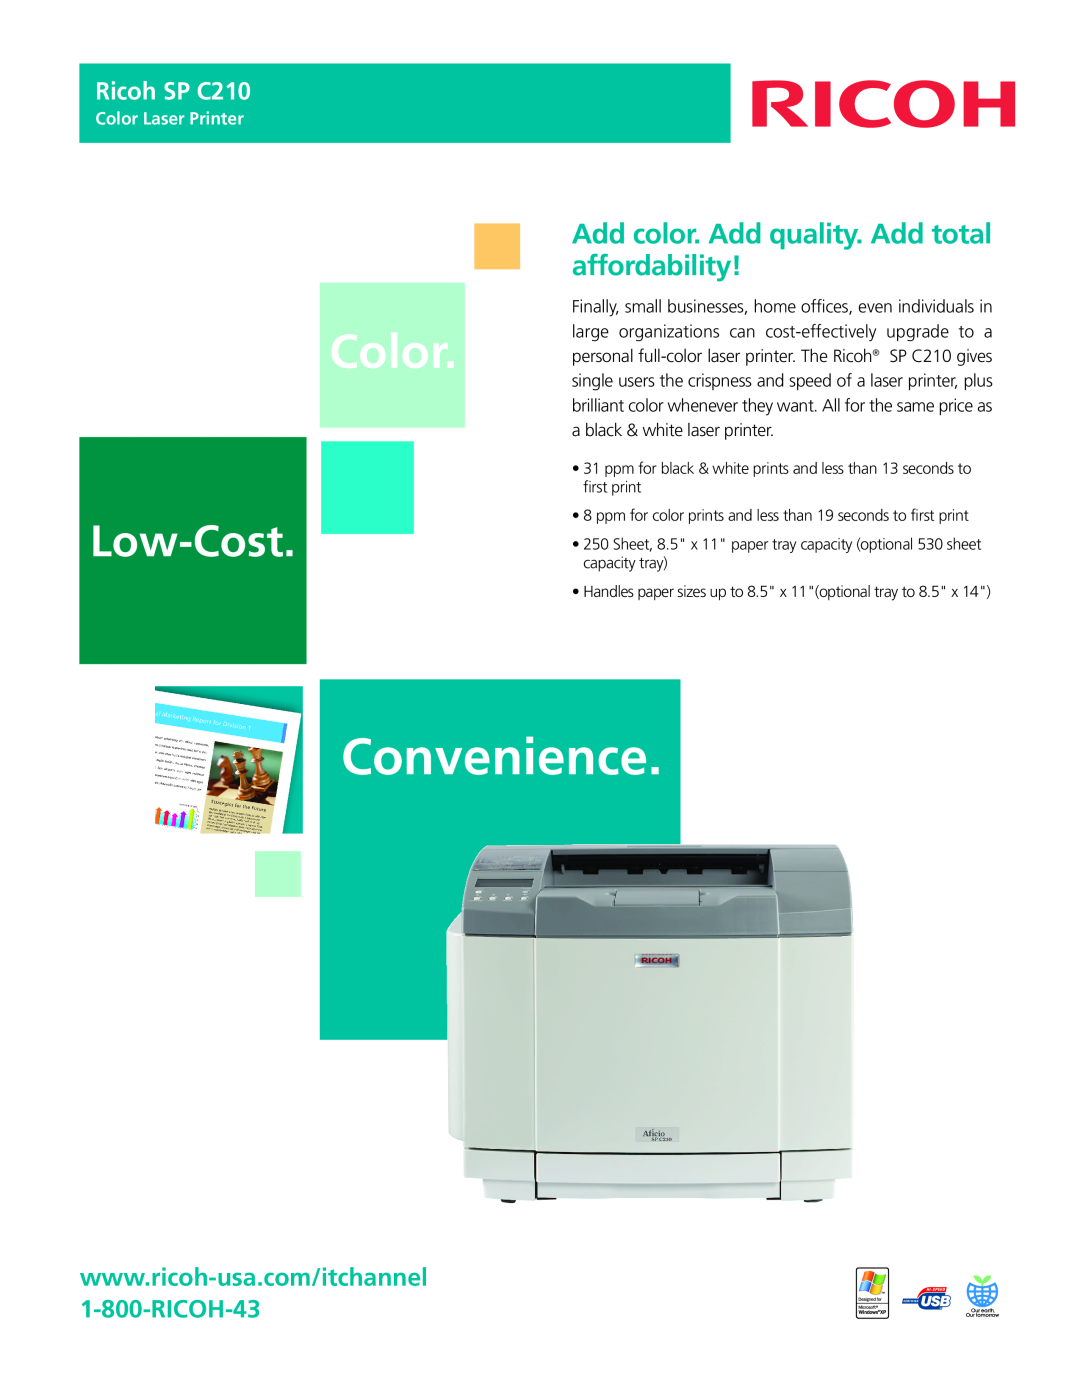 Ricoh manual Add color. Add quality. Add total affordability, Ricoh SP C210, Convenience, Low-Cost, Color Laser Printer 